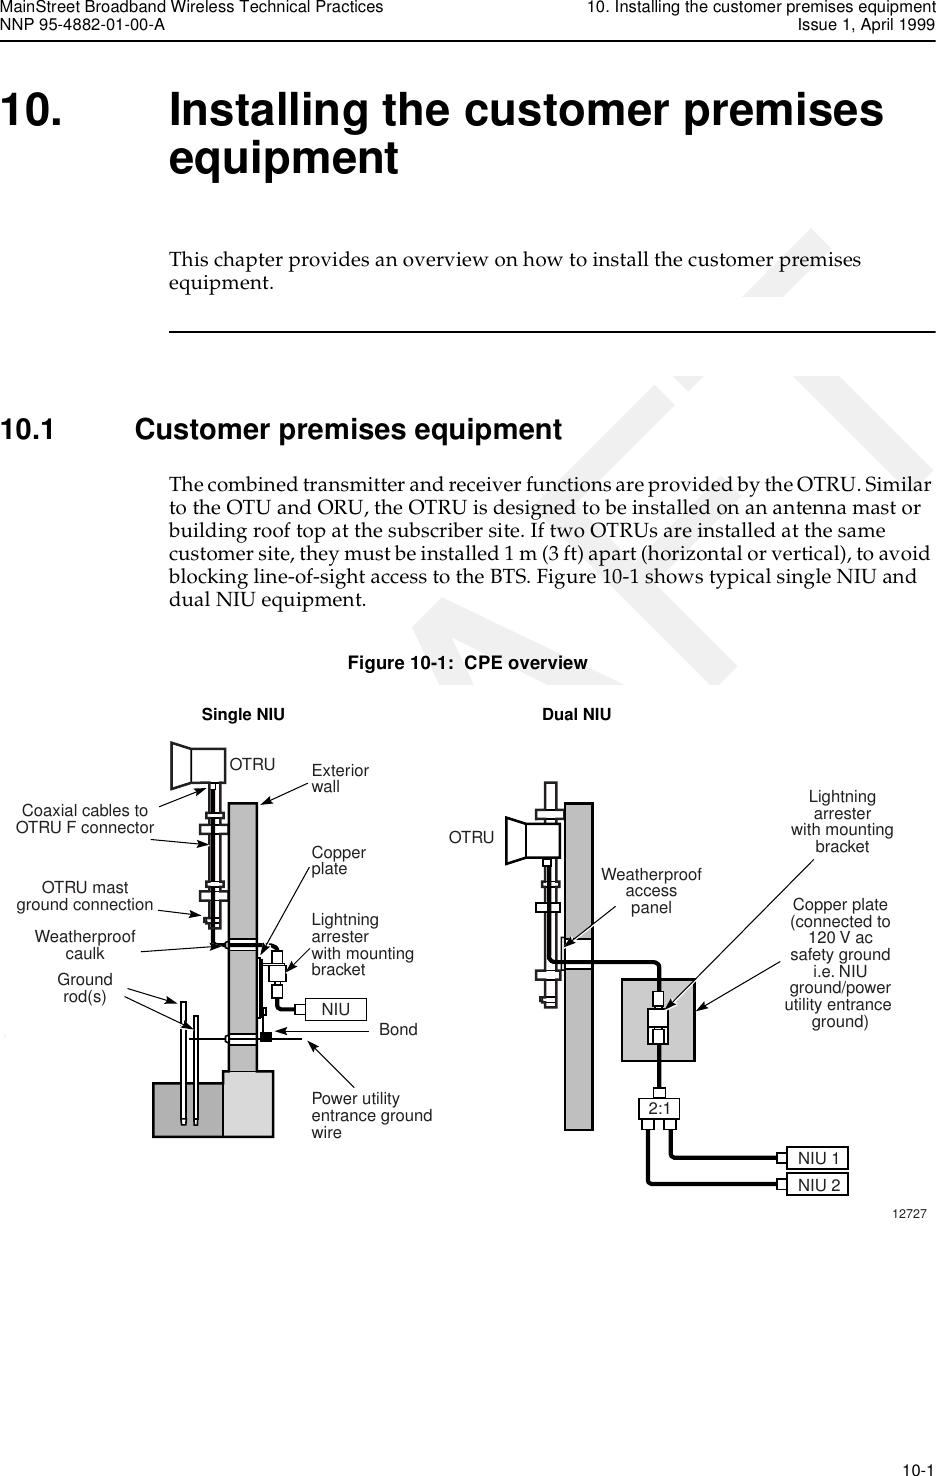 MainStreet Broadband Wireless Technical Practices 10. Installing the customer premises equipmentNNP 95-4882-01-00-A Issue 1, April 1999   10-1DRAFT10. Installing the customer premises equipmentThis chapter provides an overview on how to install the customer premises equipment.10.1 Customer premises equipmentThe combined transmitter and receiver functions are provided by the OTRU. Similar to the OTU and ORU, the OTRU is designed to be installed on an antenna mast or building roof top at the subscriber site. If two OTRUs are installed at the same customer site, they must be installed 1 m (3 ft) apart (horizontal or vertical), to avoid blocking line-of-sight access to the BTS. Figure 10-1 shows typical single NIU and dual NIU equipment.Figure 10-1:  CPE overviewOTRUOTRUCoaxial cables toOTRU F connectorOTRU mastground connectionWeatherproofcaulkGroundrod(s) NIULightningarresterwith mountingbracketCopperplateExteriorwallPower utilityentrance groundwireNIU 1NIU 2Copper plate(connected to120 V acsafety groundi.e. NIUground/powerutility entrance ground)Lightningarresterwith mountingbracketWeatherproofaccesspanel2:1Bond12727Single NIU Dual NIU